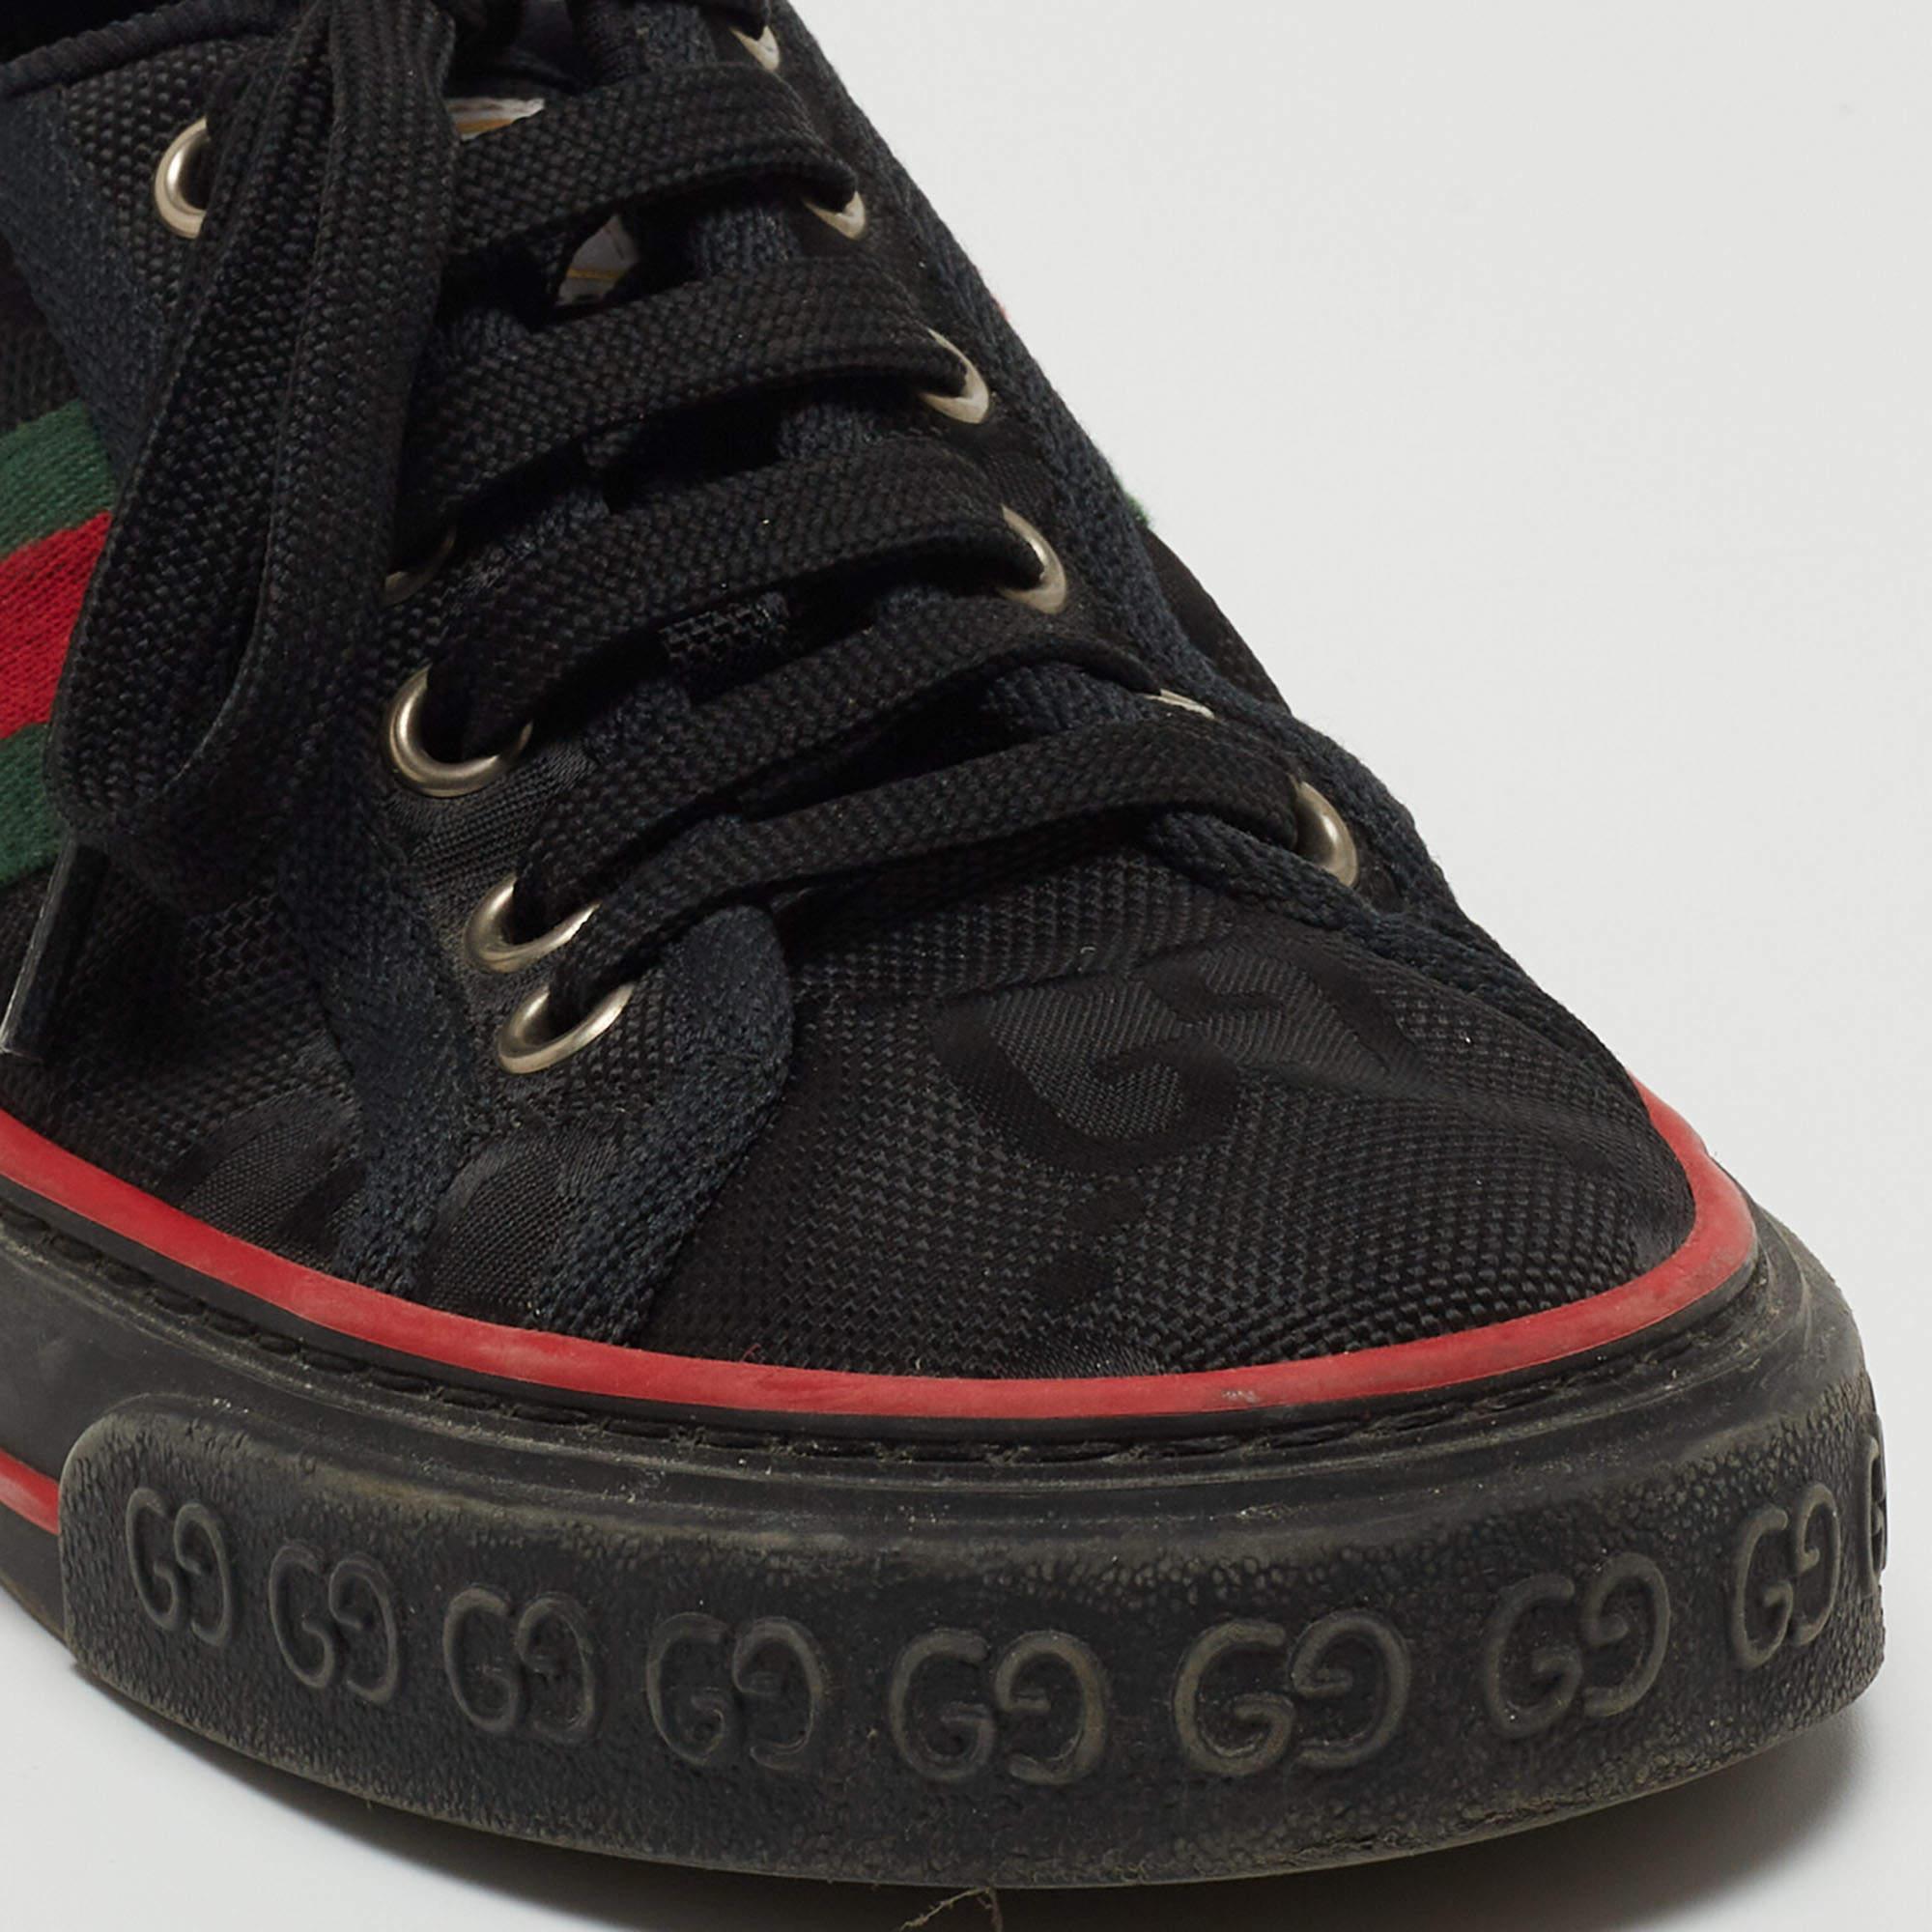 Gucci Black GG Canvas Tennis 1977 Sneakers Size 36 3